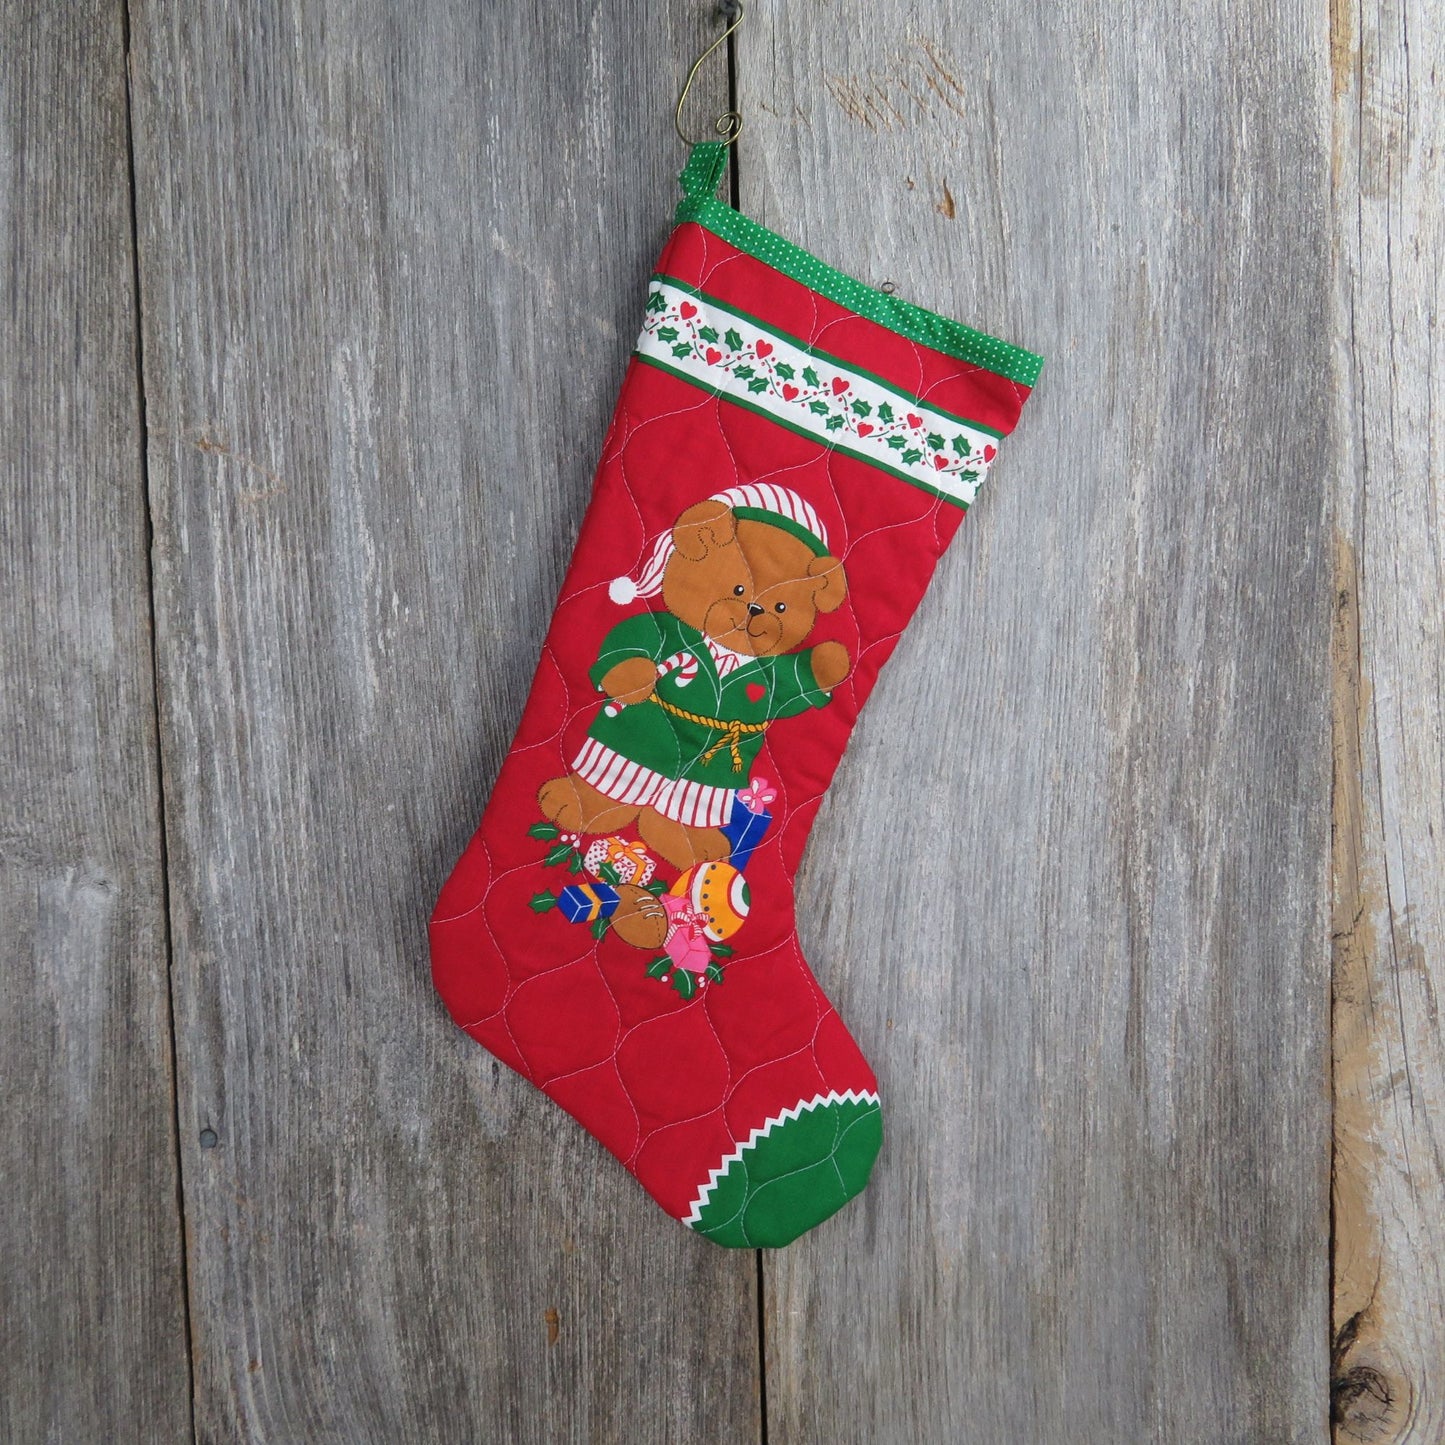 Vintage Teddy Bear Boy Christmas Stocking Quilted Handmade Fabric Red Green Cloth  st282